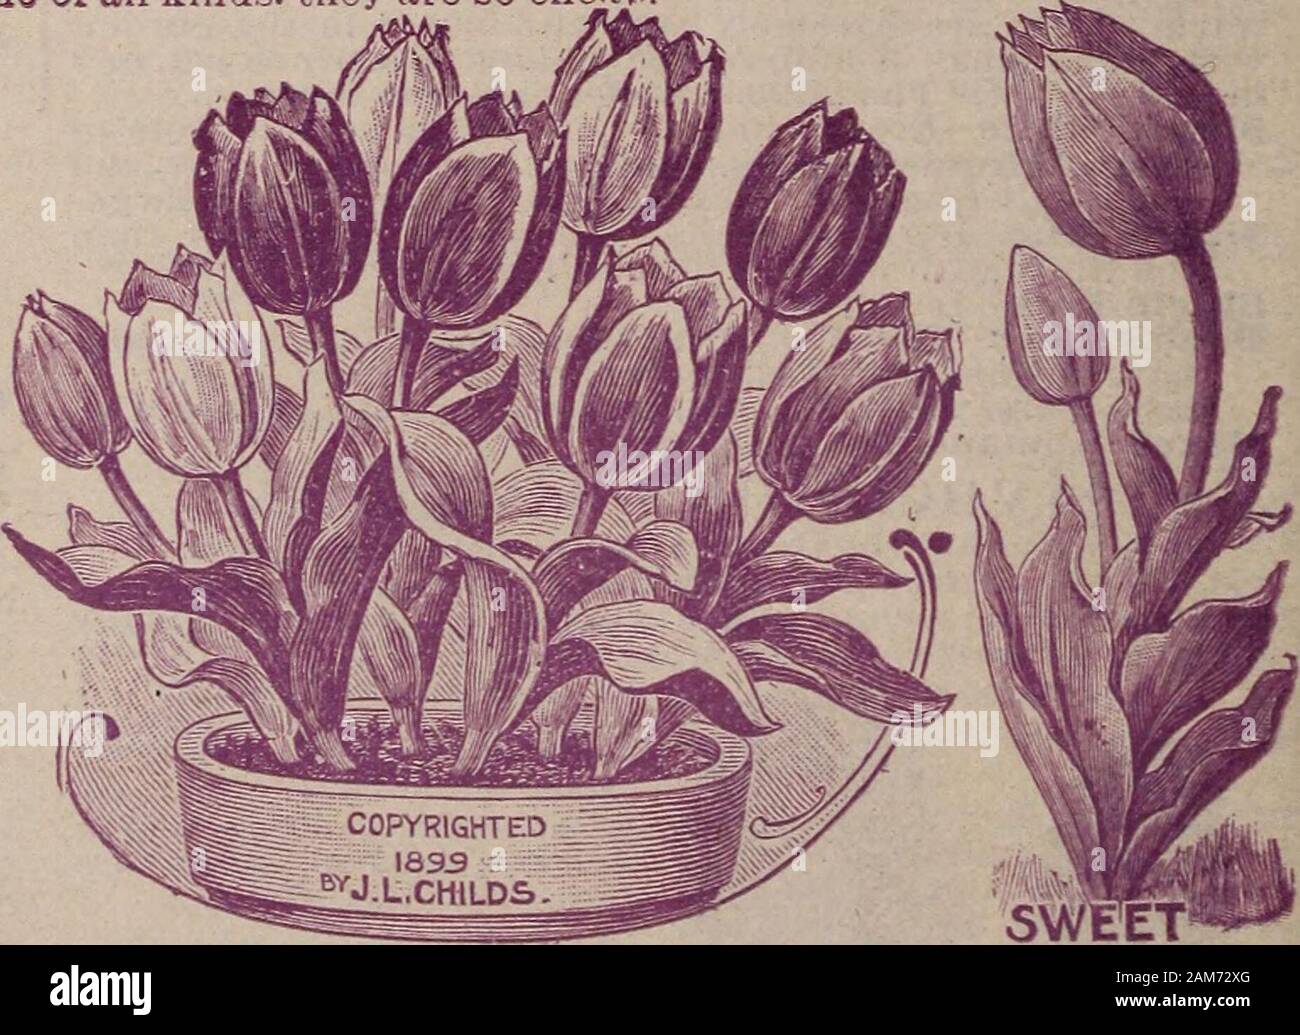 Childs' combination catalogue for 1910 : flower seeds vegetable seeds summer bulbs hardy bulbs and plants house plants shrubs new fruits and dutch or full bulbs . FINF, DOUBLE TTJXIPS. Alba Maxima—Enormous flowers, perfectly double, like aPeony, pure white in color, with delicate shadowy tingeof soft pink. Exceedingly fine. Count de Leicester—Another very distinct and finely color-ed sort. Light orange feathered yellow. Mariage de Ma Fille - Immense flower of the most perfectshape and superb coloring. Carmine-red, banded, strip-ed, flaked and feathered with pure white. Murillo Large, graceful Stock Photo